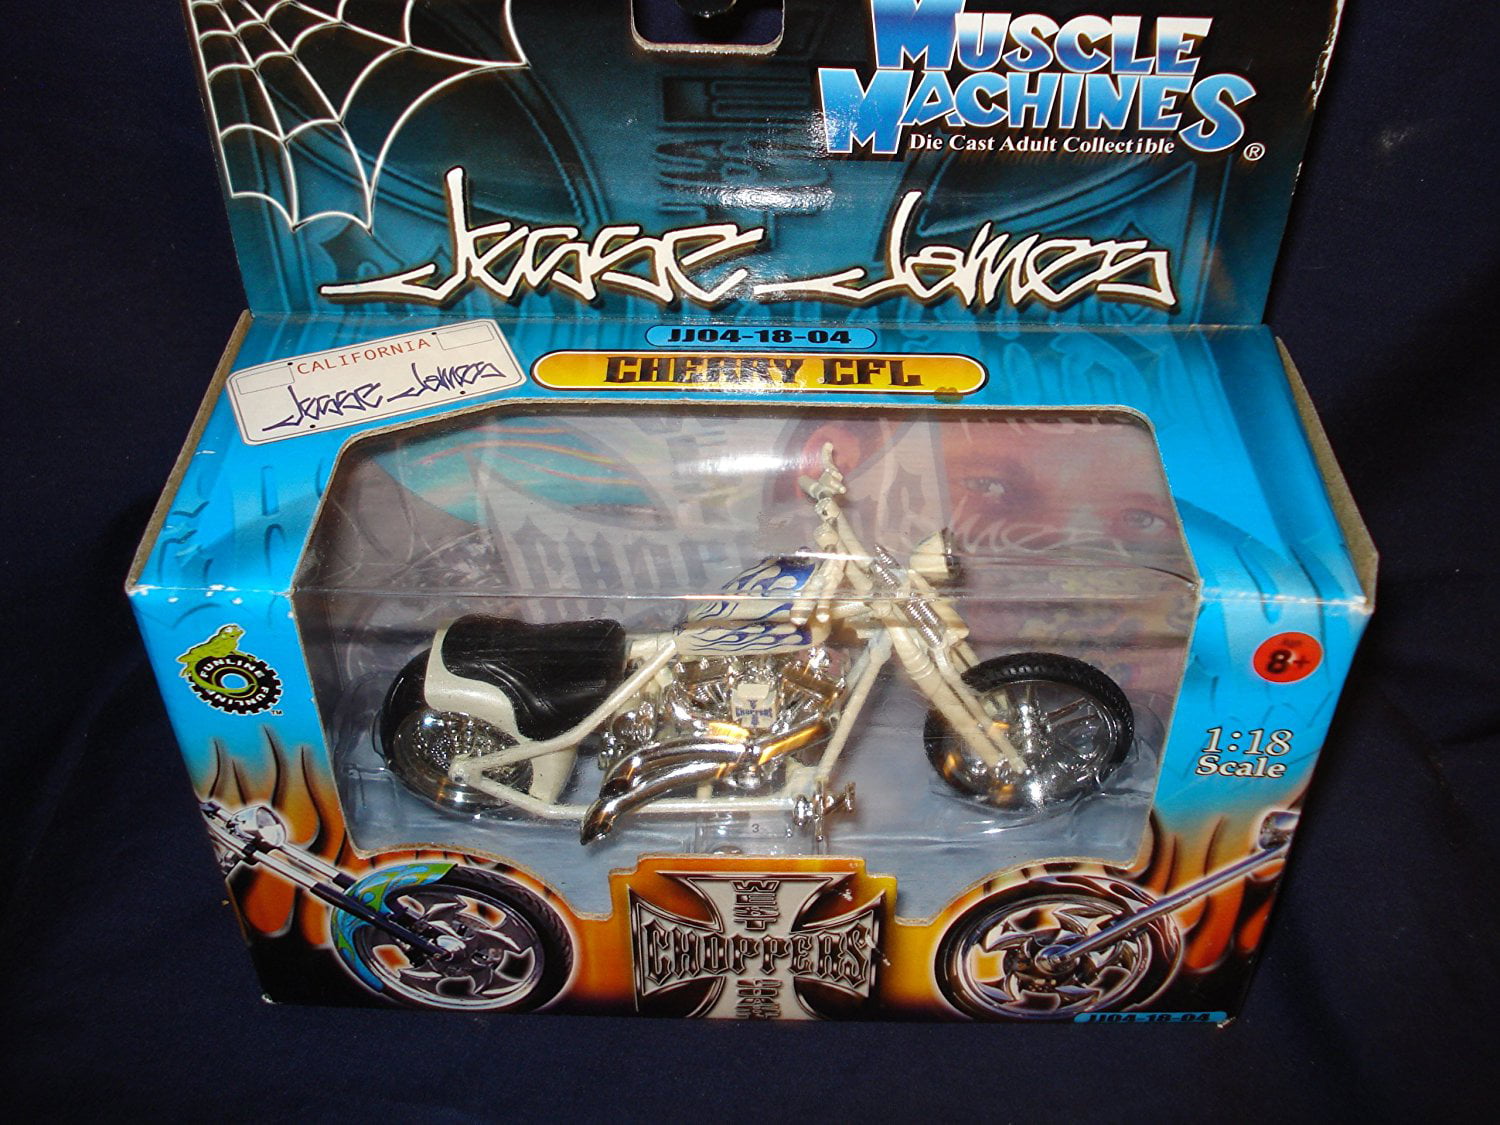 2003 Muscle Machines Jesse James West Coast Choppers Die-cast Cherry CFL 1 18 for sale online 